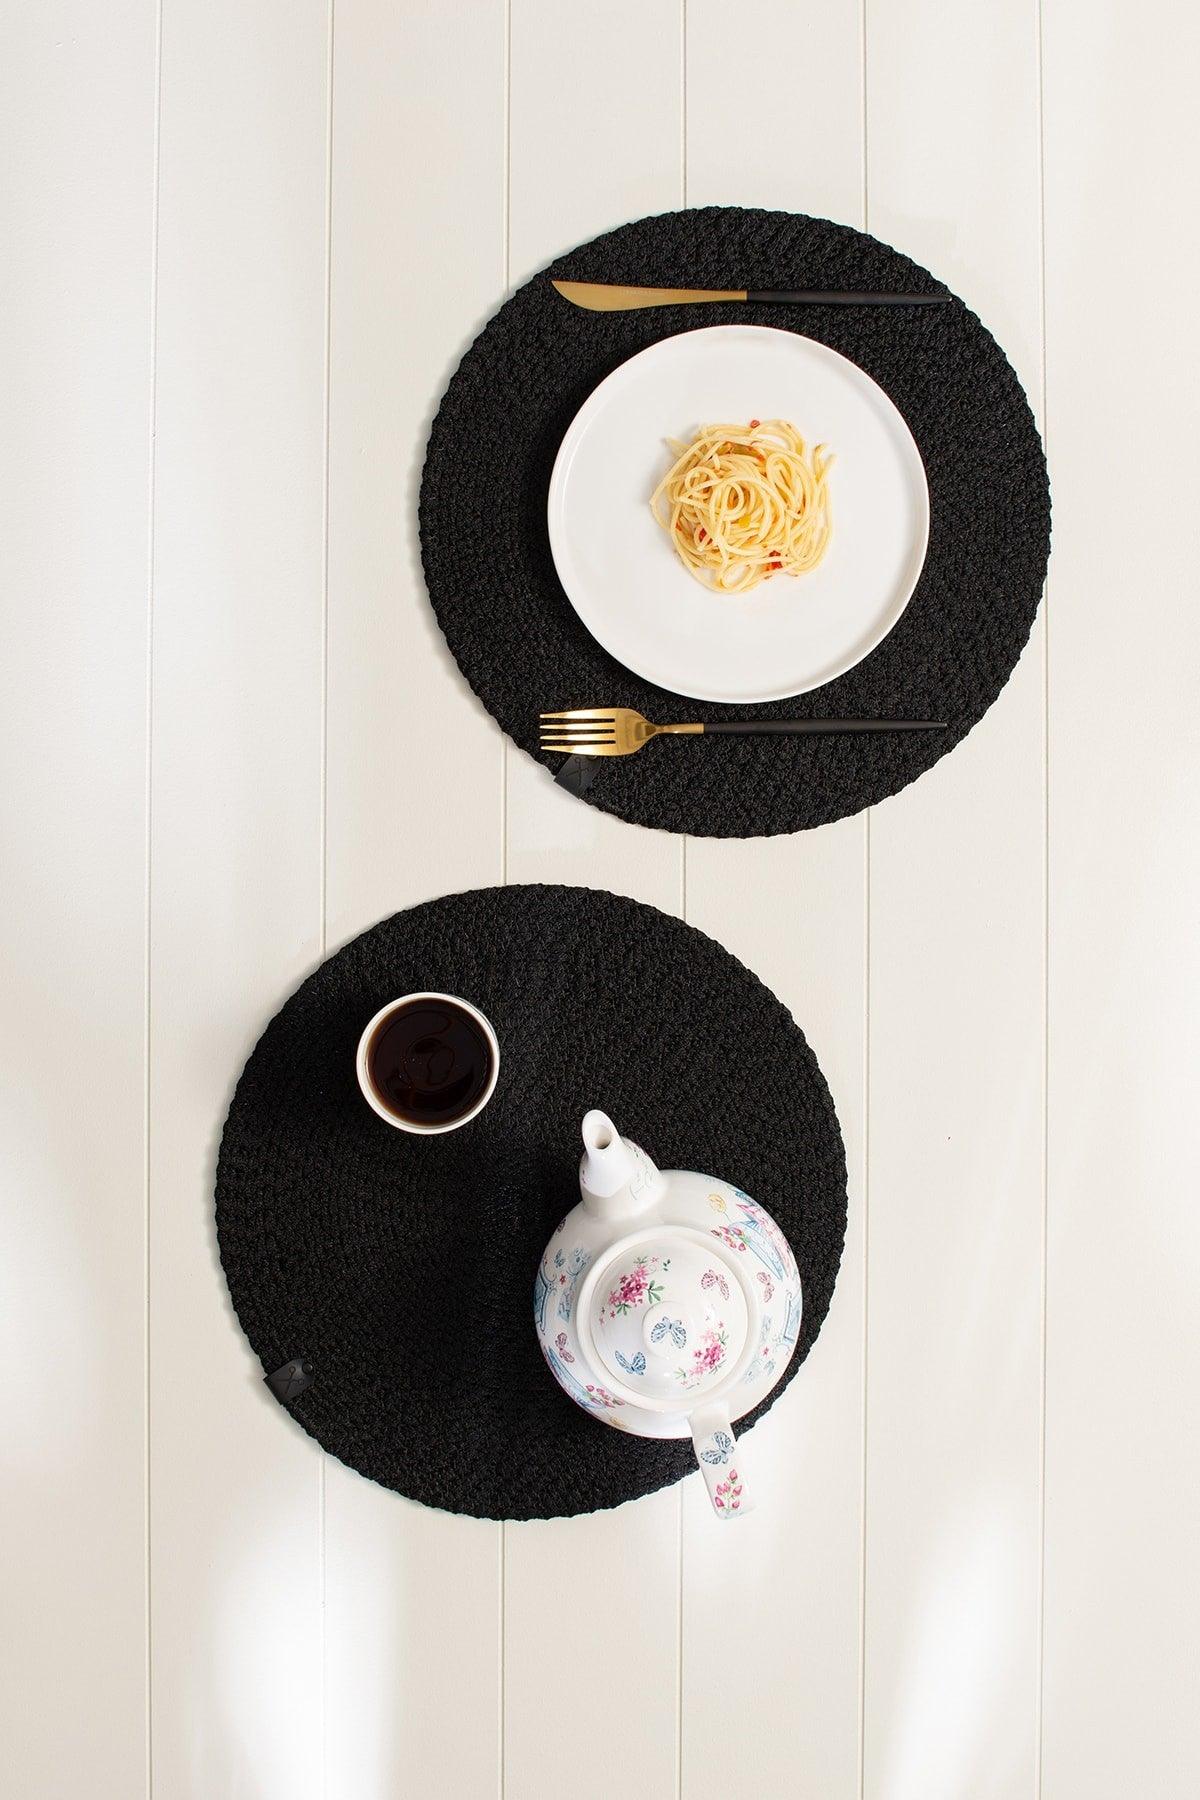 2 Pieces Stain Resistant Washable 36cm Black Placemats Straw Bamboo Knit Bottom Christmas Gift - Swordslife